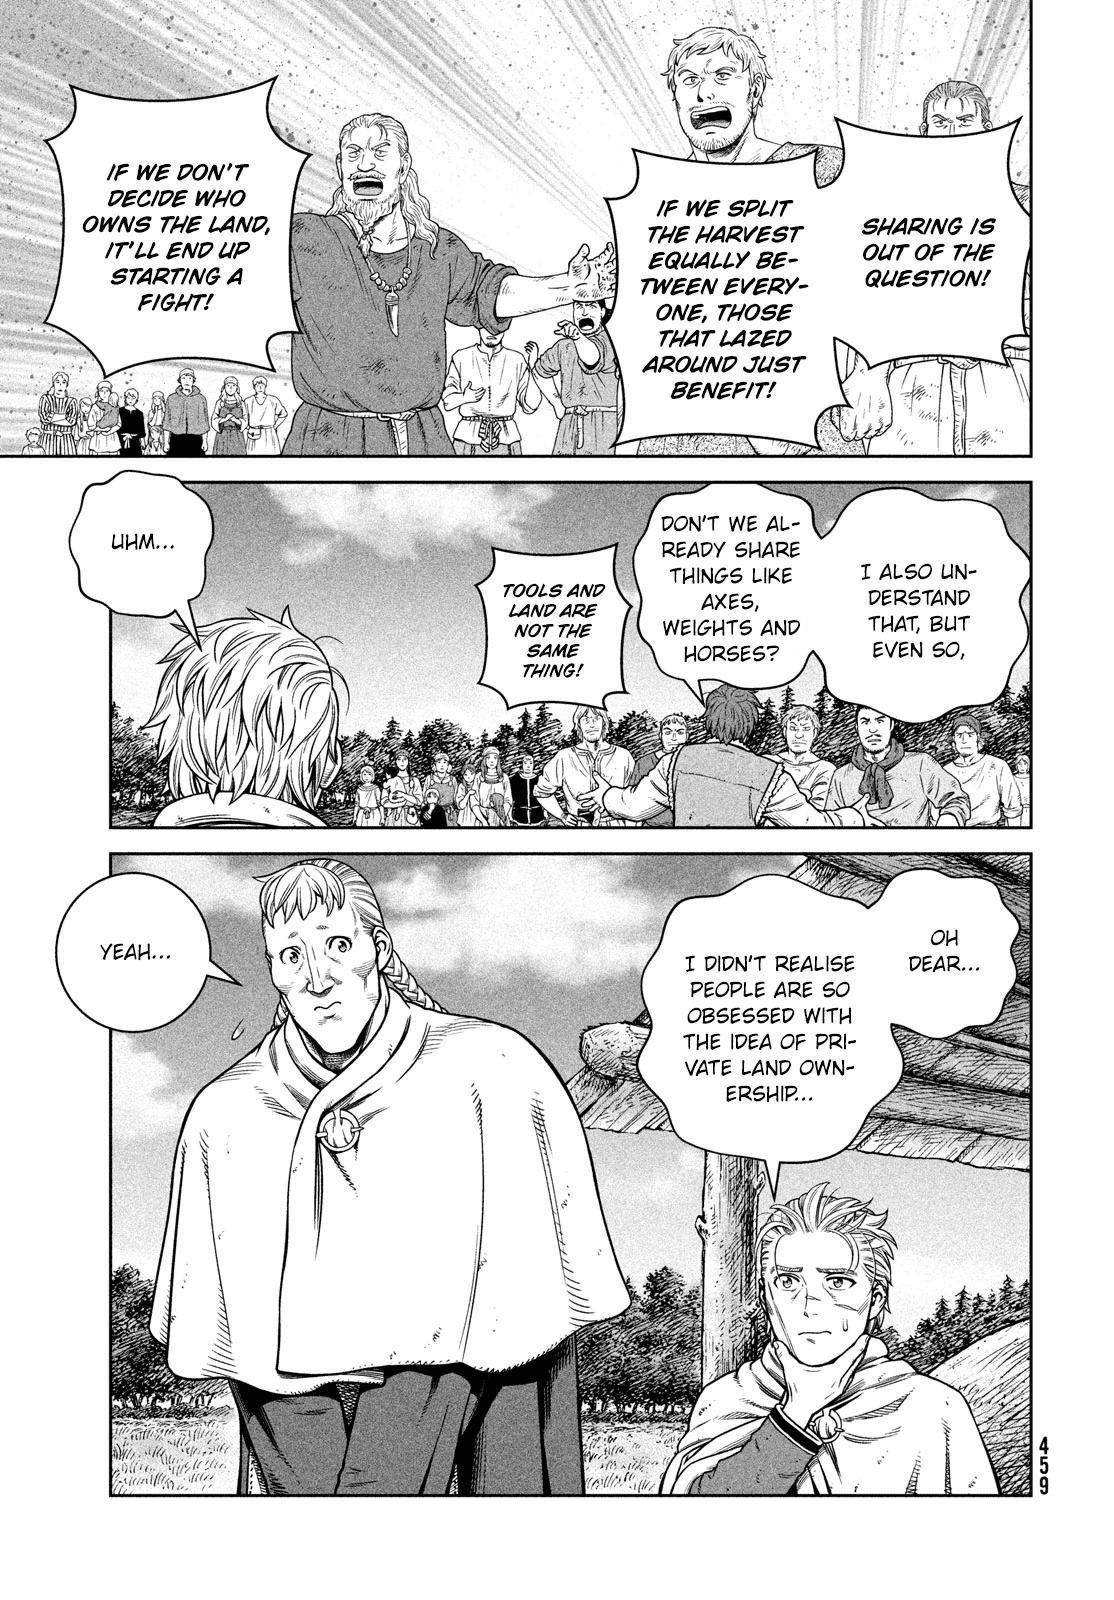 vinland saga 186, vinland saga 186, Read vinland saga 186, vinland saga 186 Manga, vinland saga 186 english, vinland saga 186 raw manga, vinland saga 186 online, vinland saga 186 high quality, vinland saga 186 chapter, vinland saga 186 manga scan